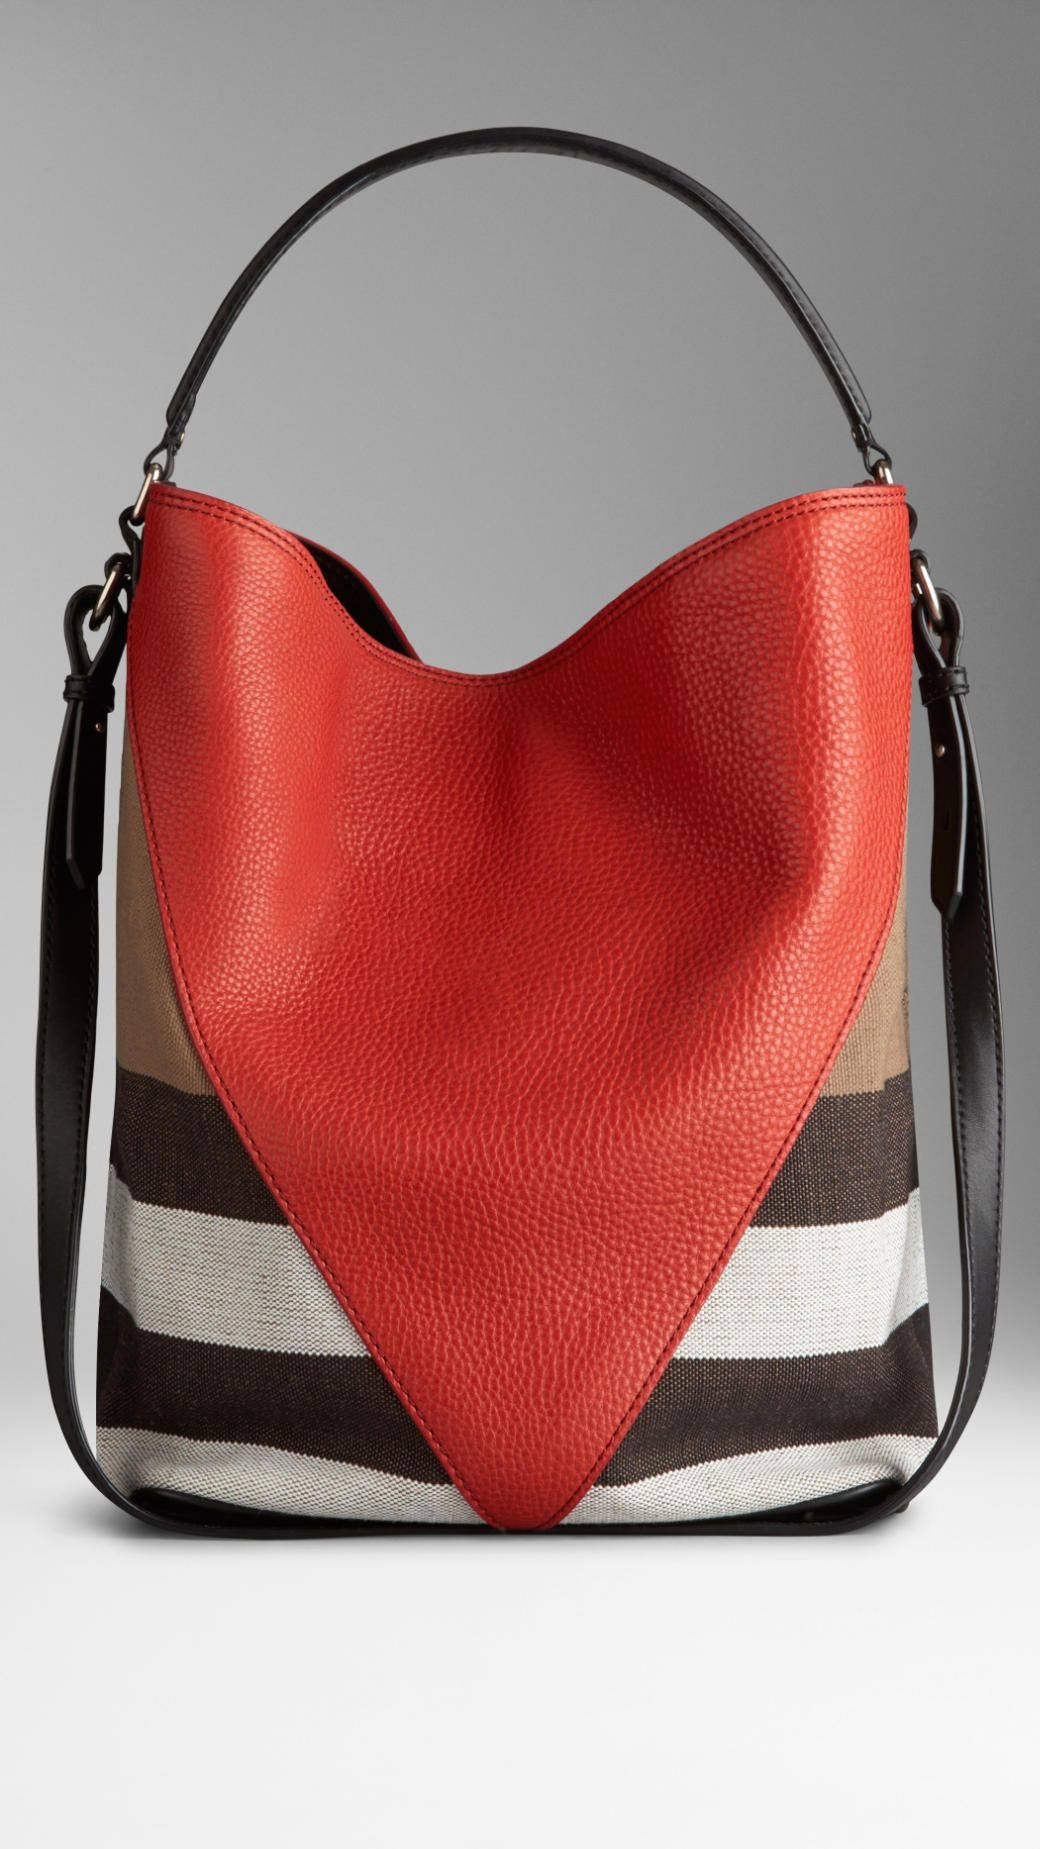 Lyst - Burberry Medium Canvas Check Leather Chevron Hobo Bag in Red